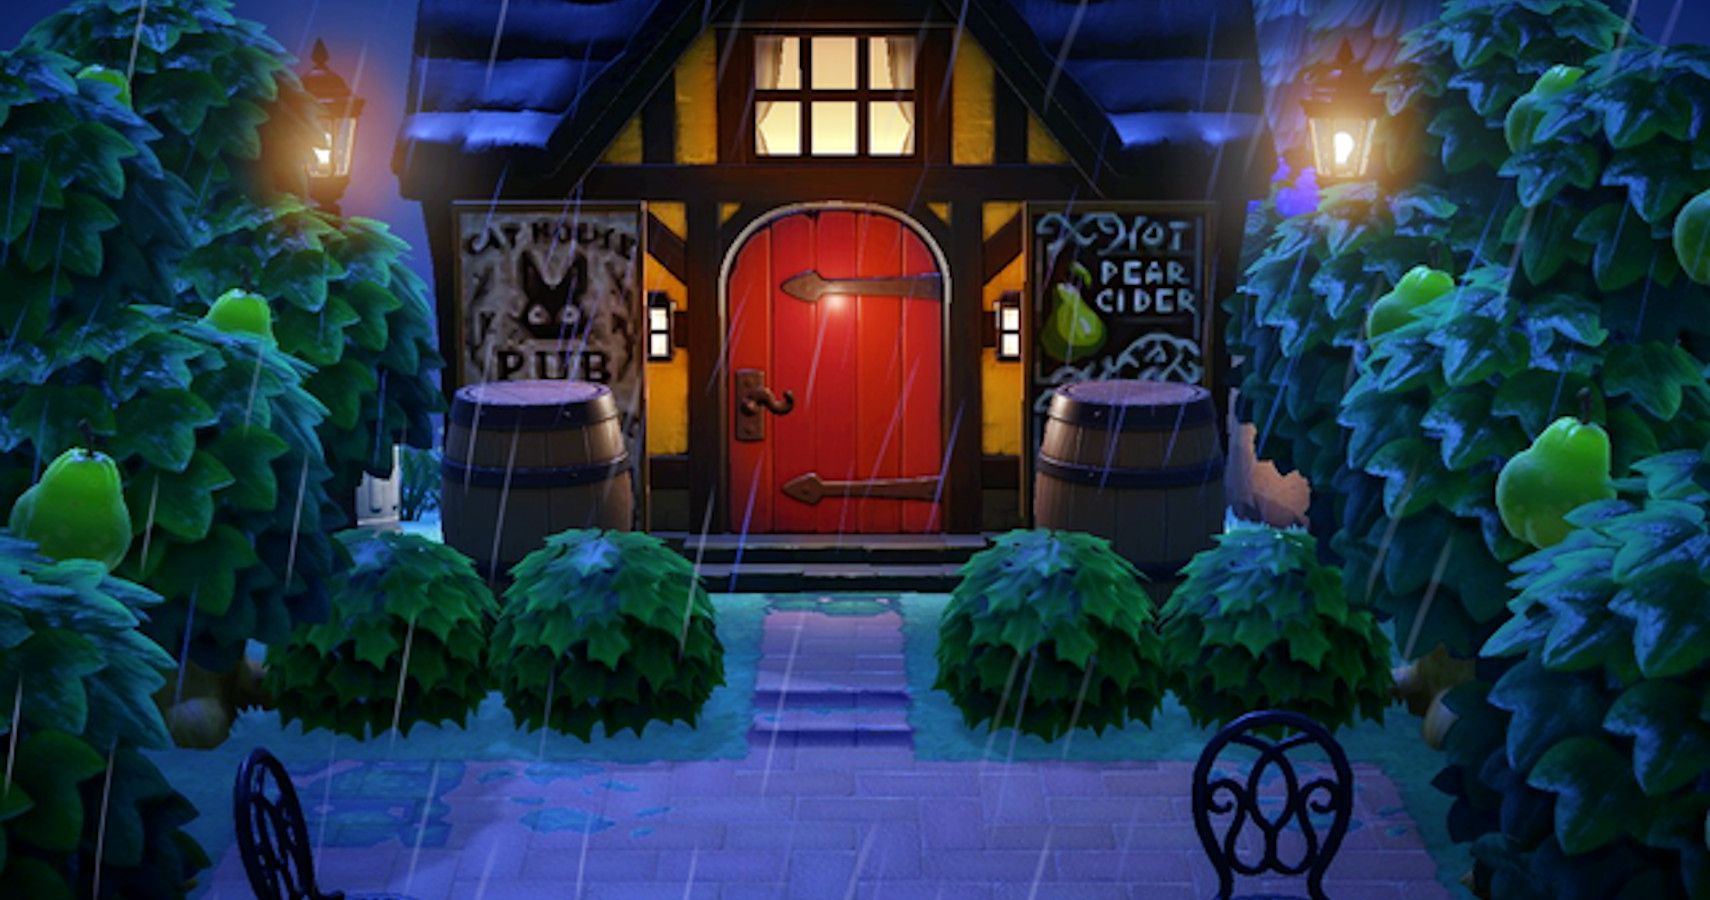 Animal Crossing Design Spotlight The Cat House Pub Calvin & Hobbes And More!